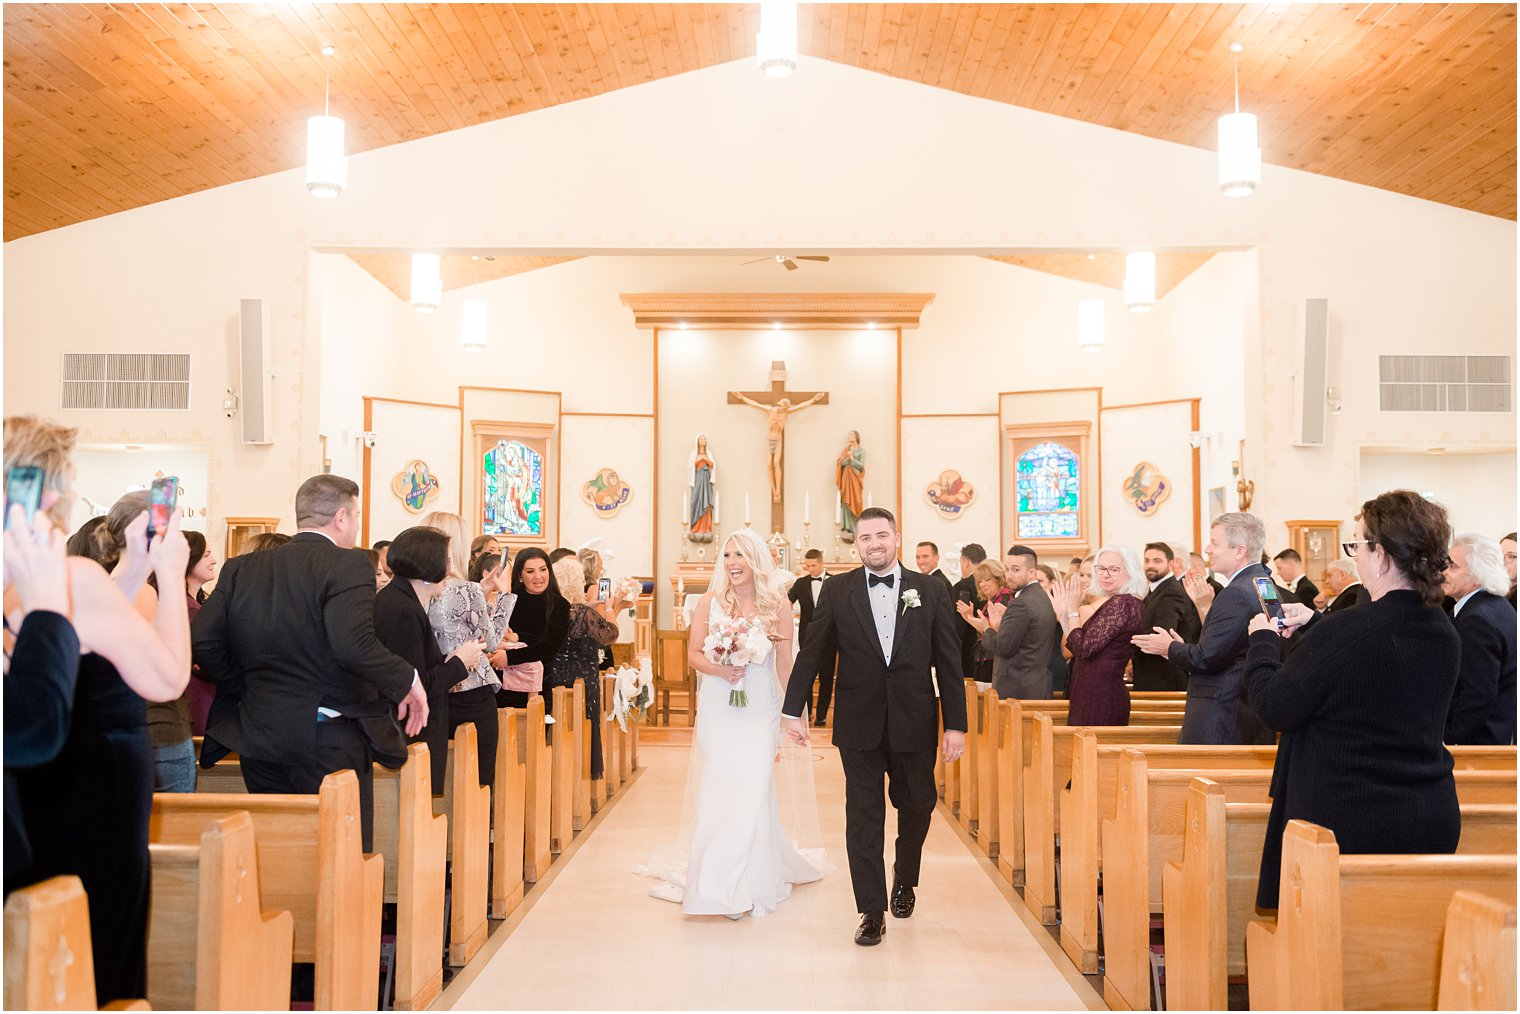 newlyweds recess up aisle after church wedding ceremony in New Jersey